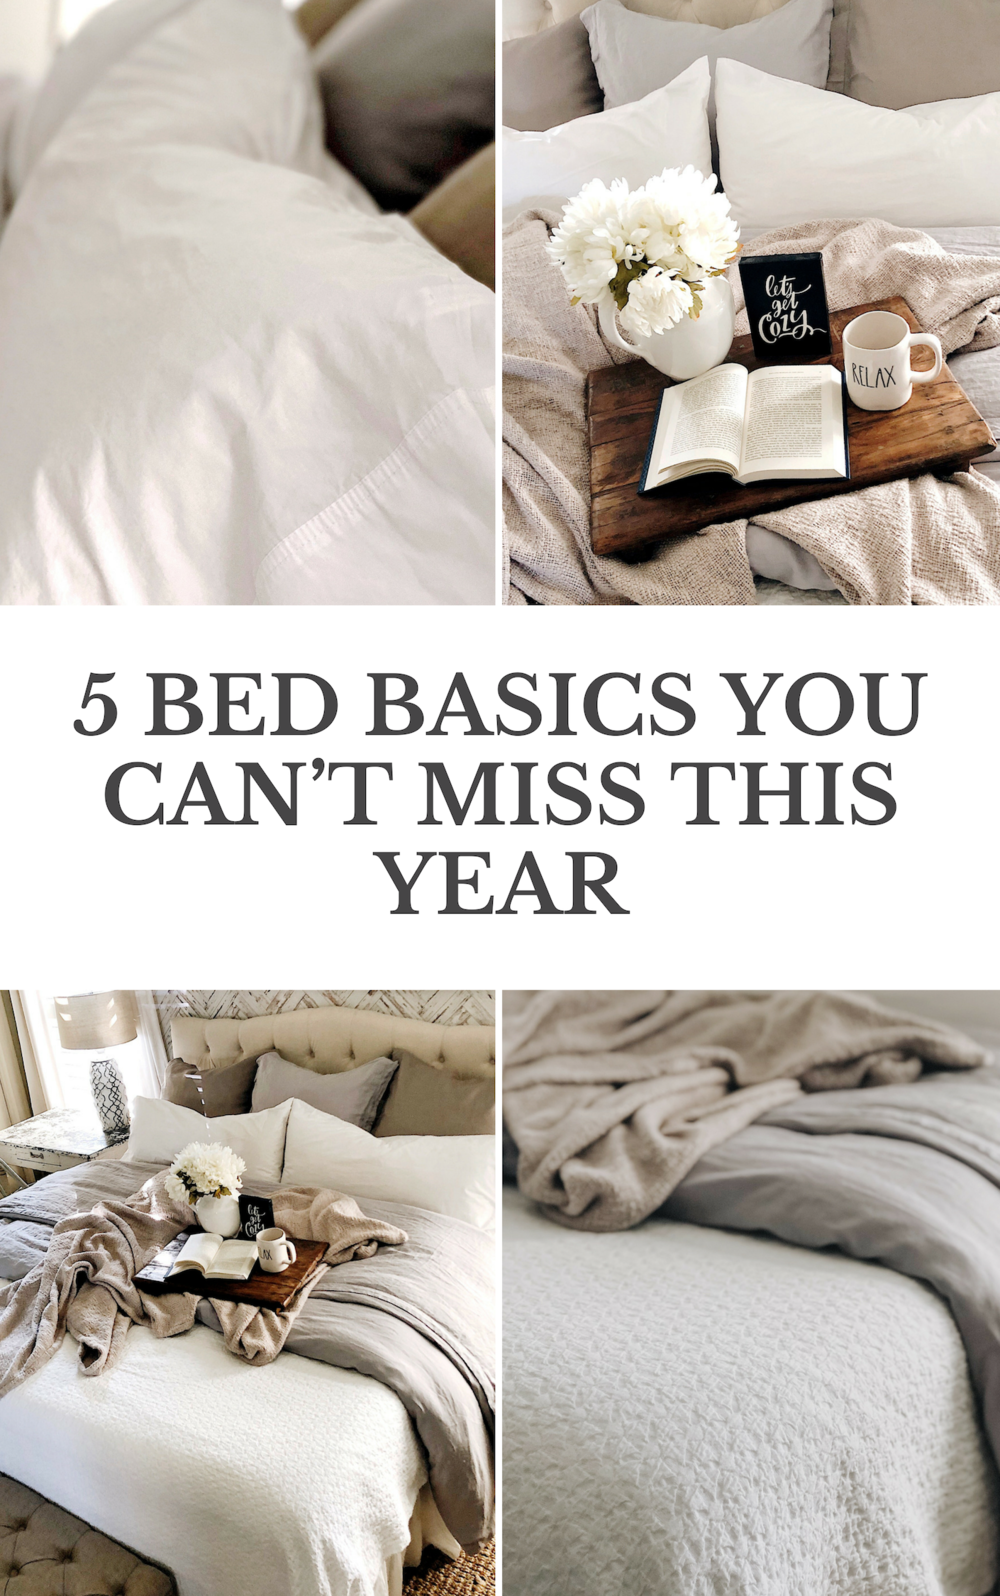 5 bed basics you can’t miss this year.png